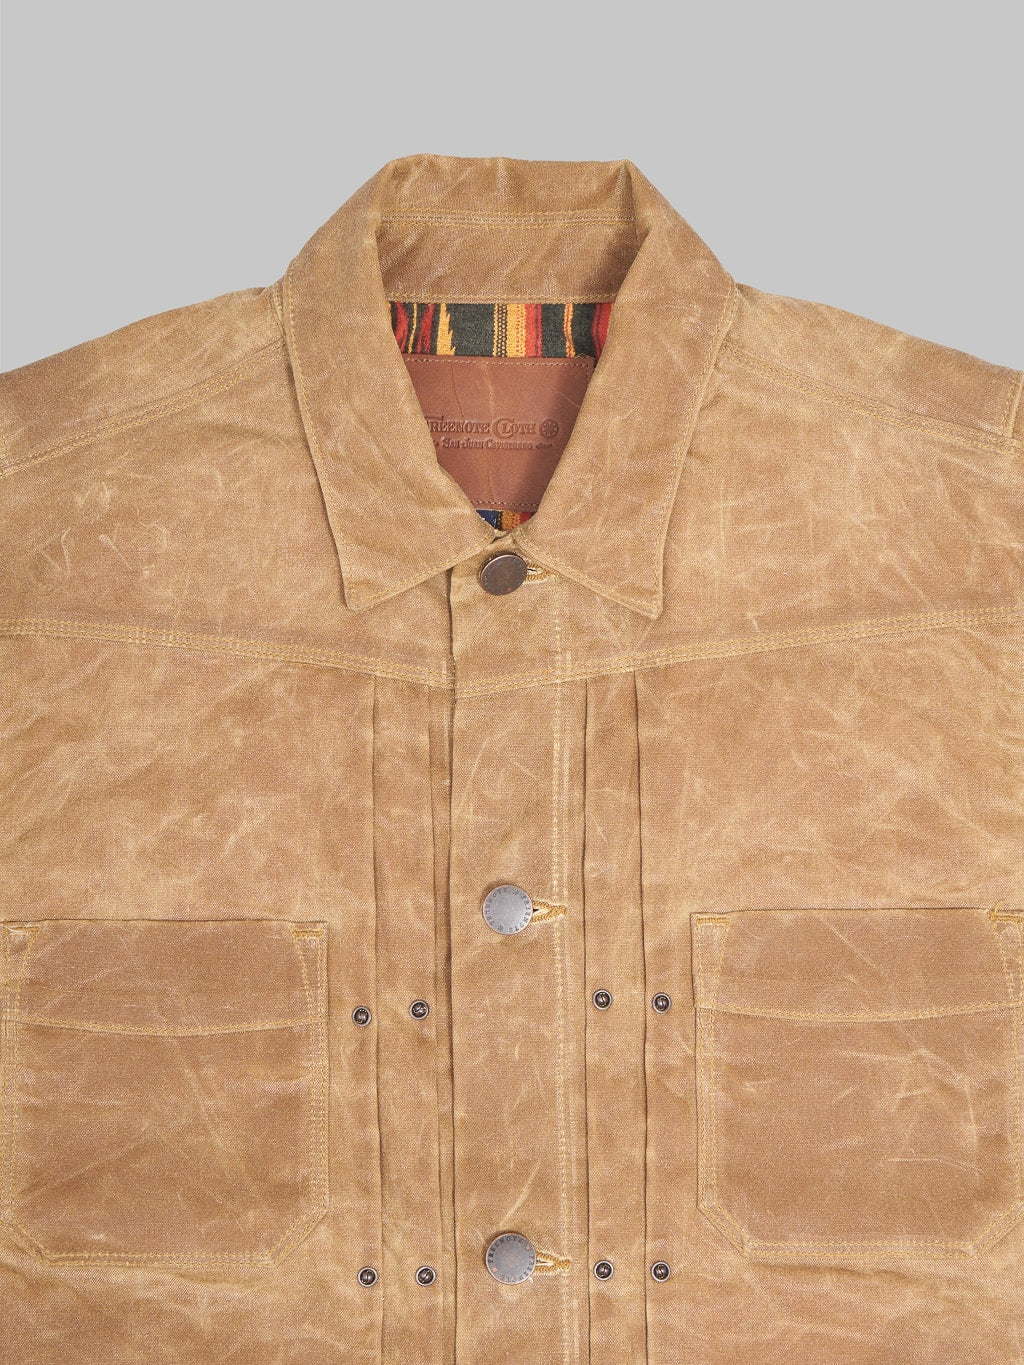 Freenote Cloth Riders Jacket Waxed Canvas Rust chest pockets